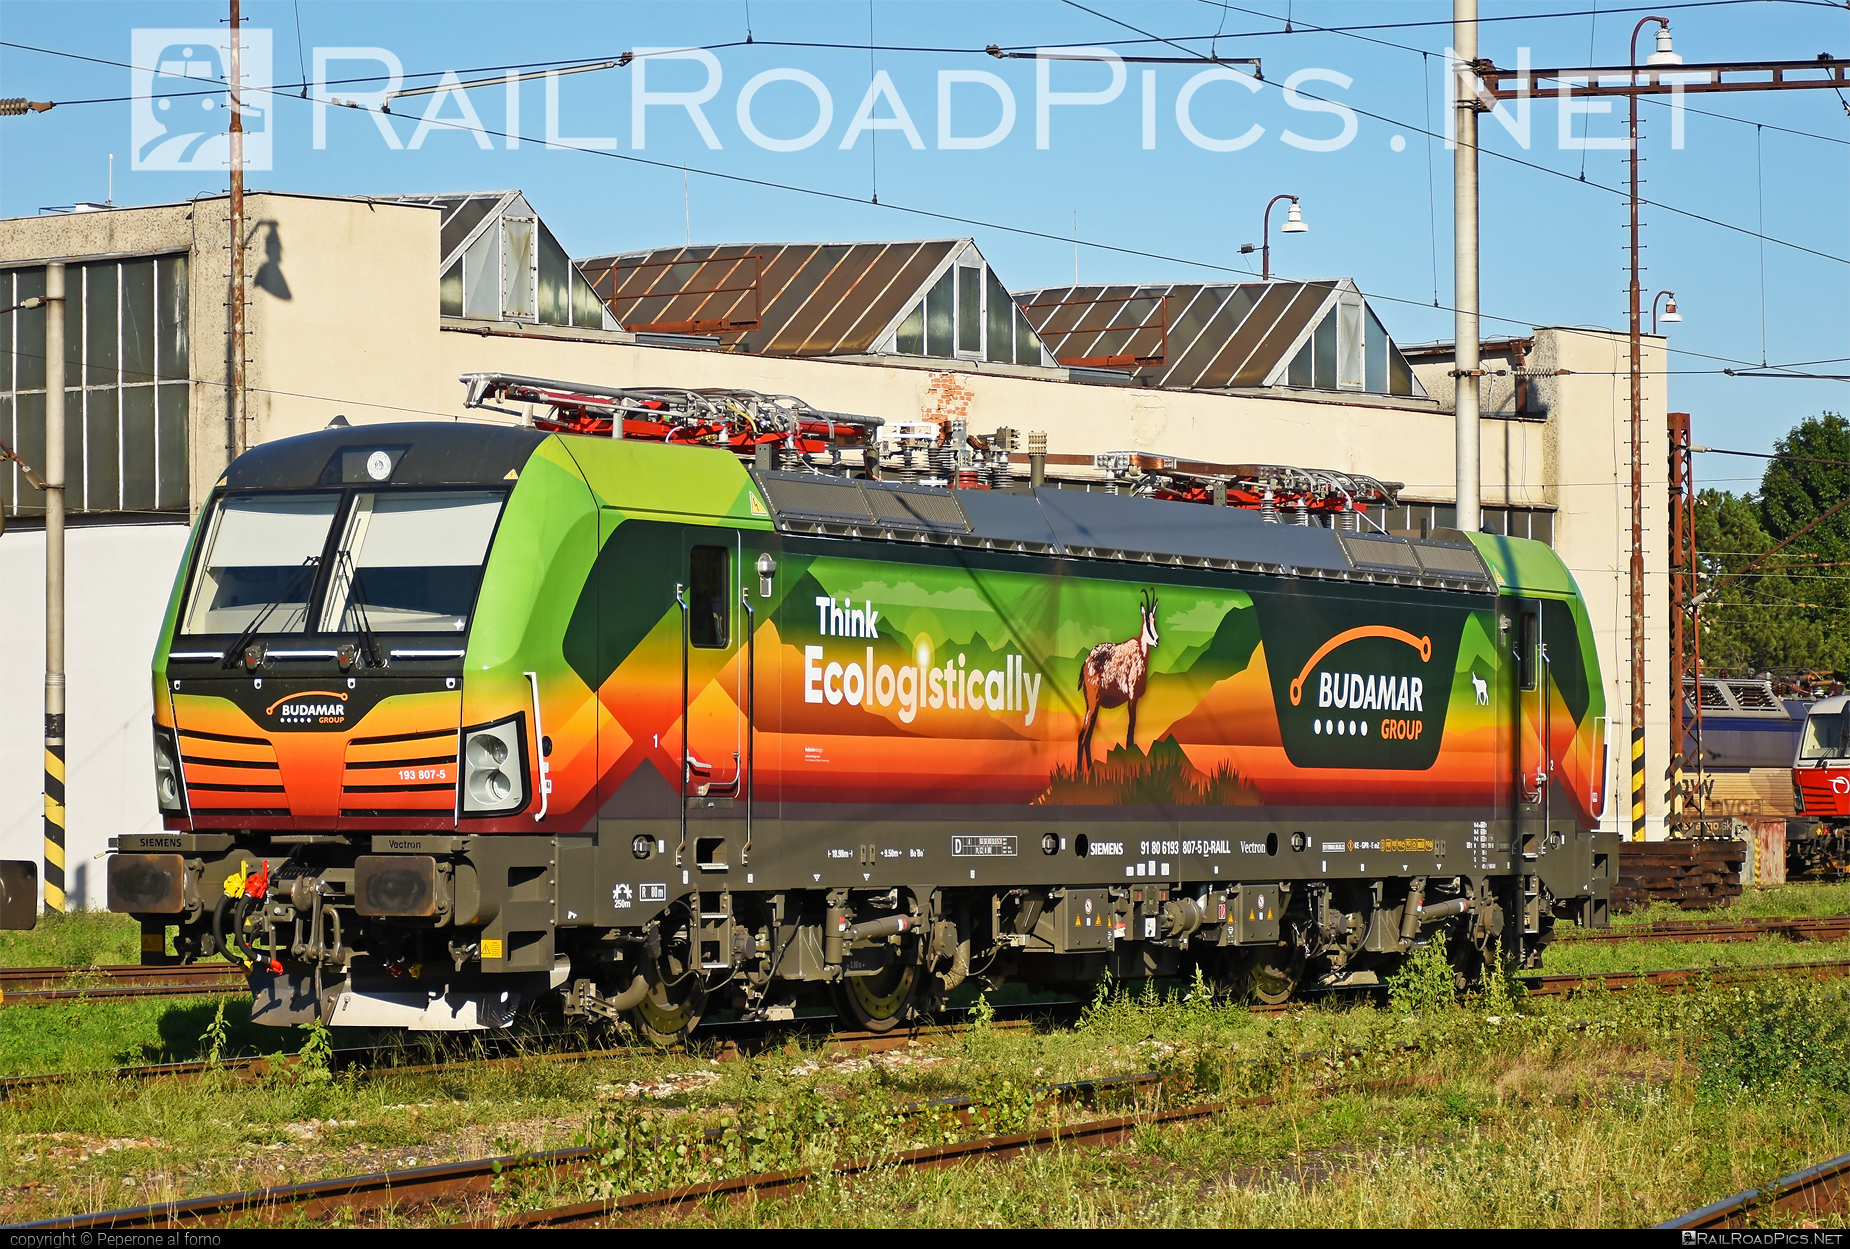 Siemens Vectron MS - 193 807-5 operated by LOKORAIL, a.s. #RollingStockLease #RollingStockLeaseSro #budamar #lokorail #lrl #raill #siemens #siemensVectron #siemensVectronMS #vectron #vectronMS